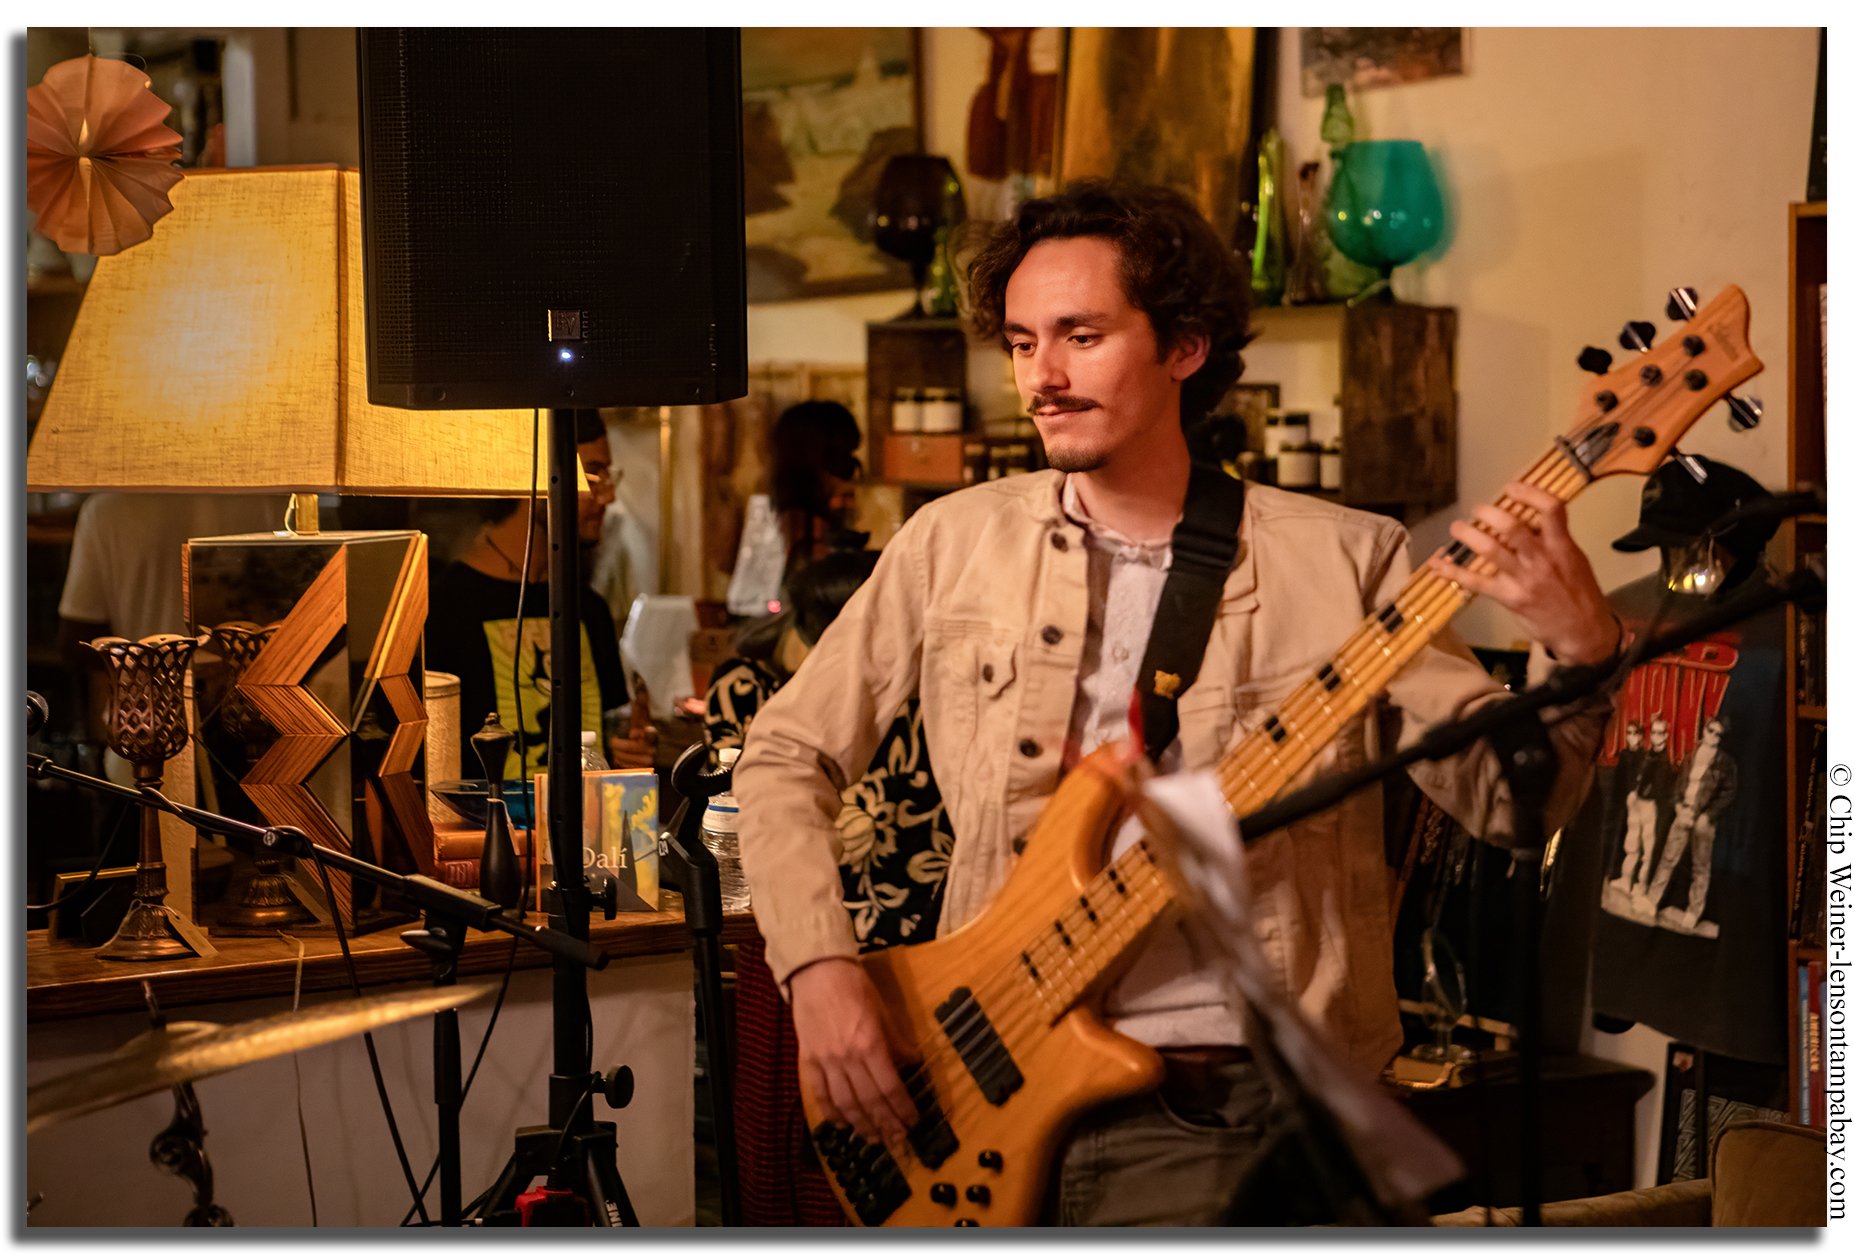 Noel Reyes played both stand-up and electric bass at the show